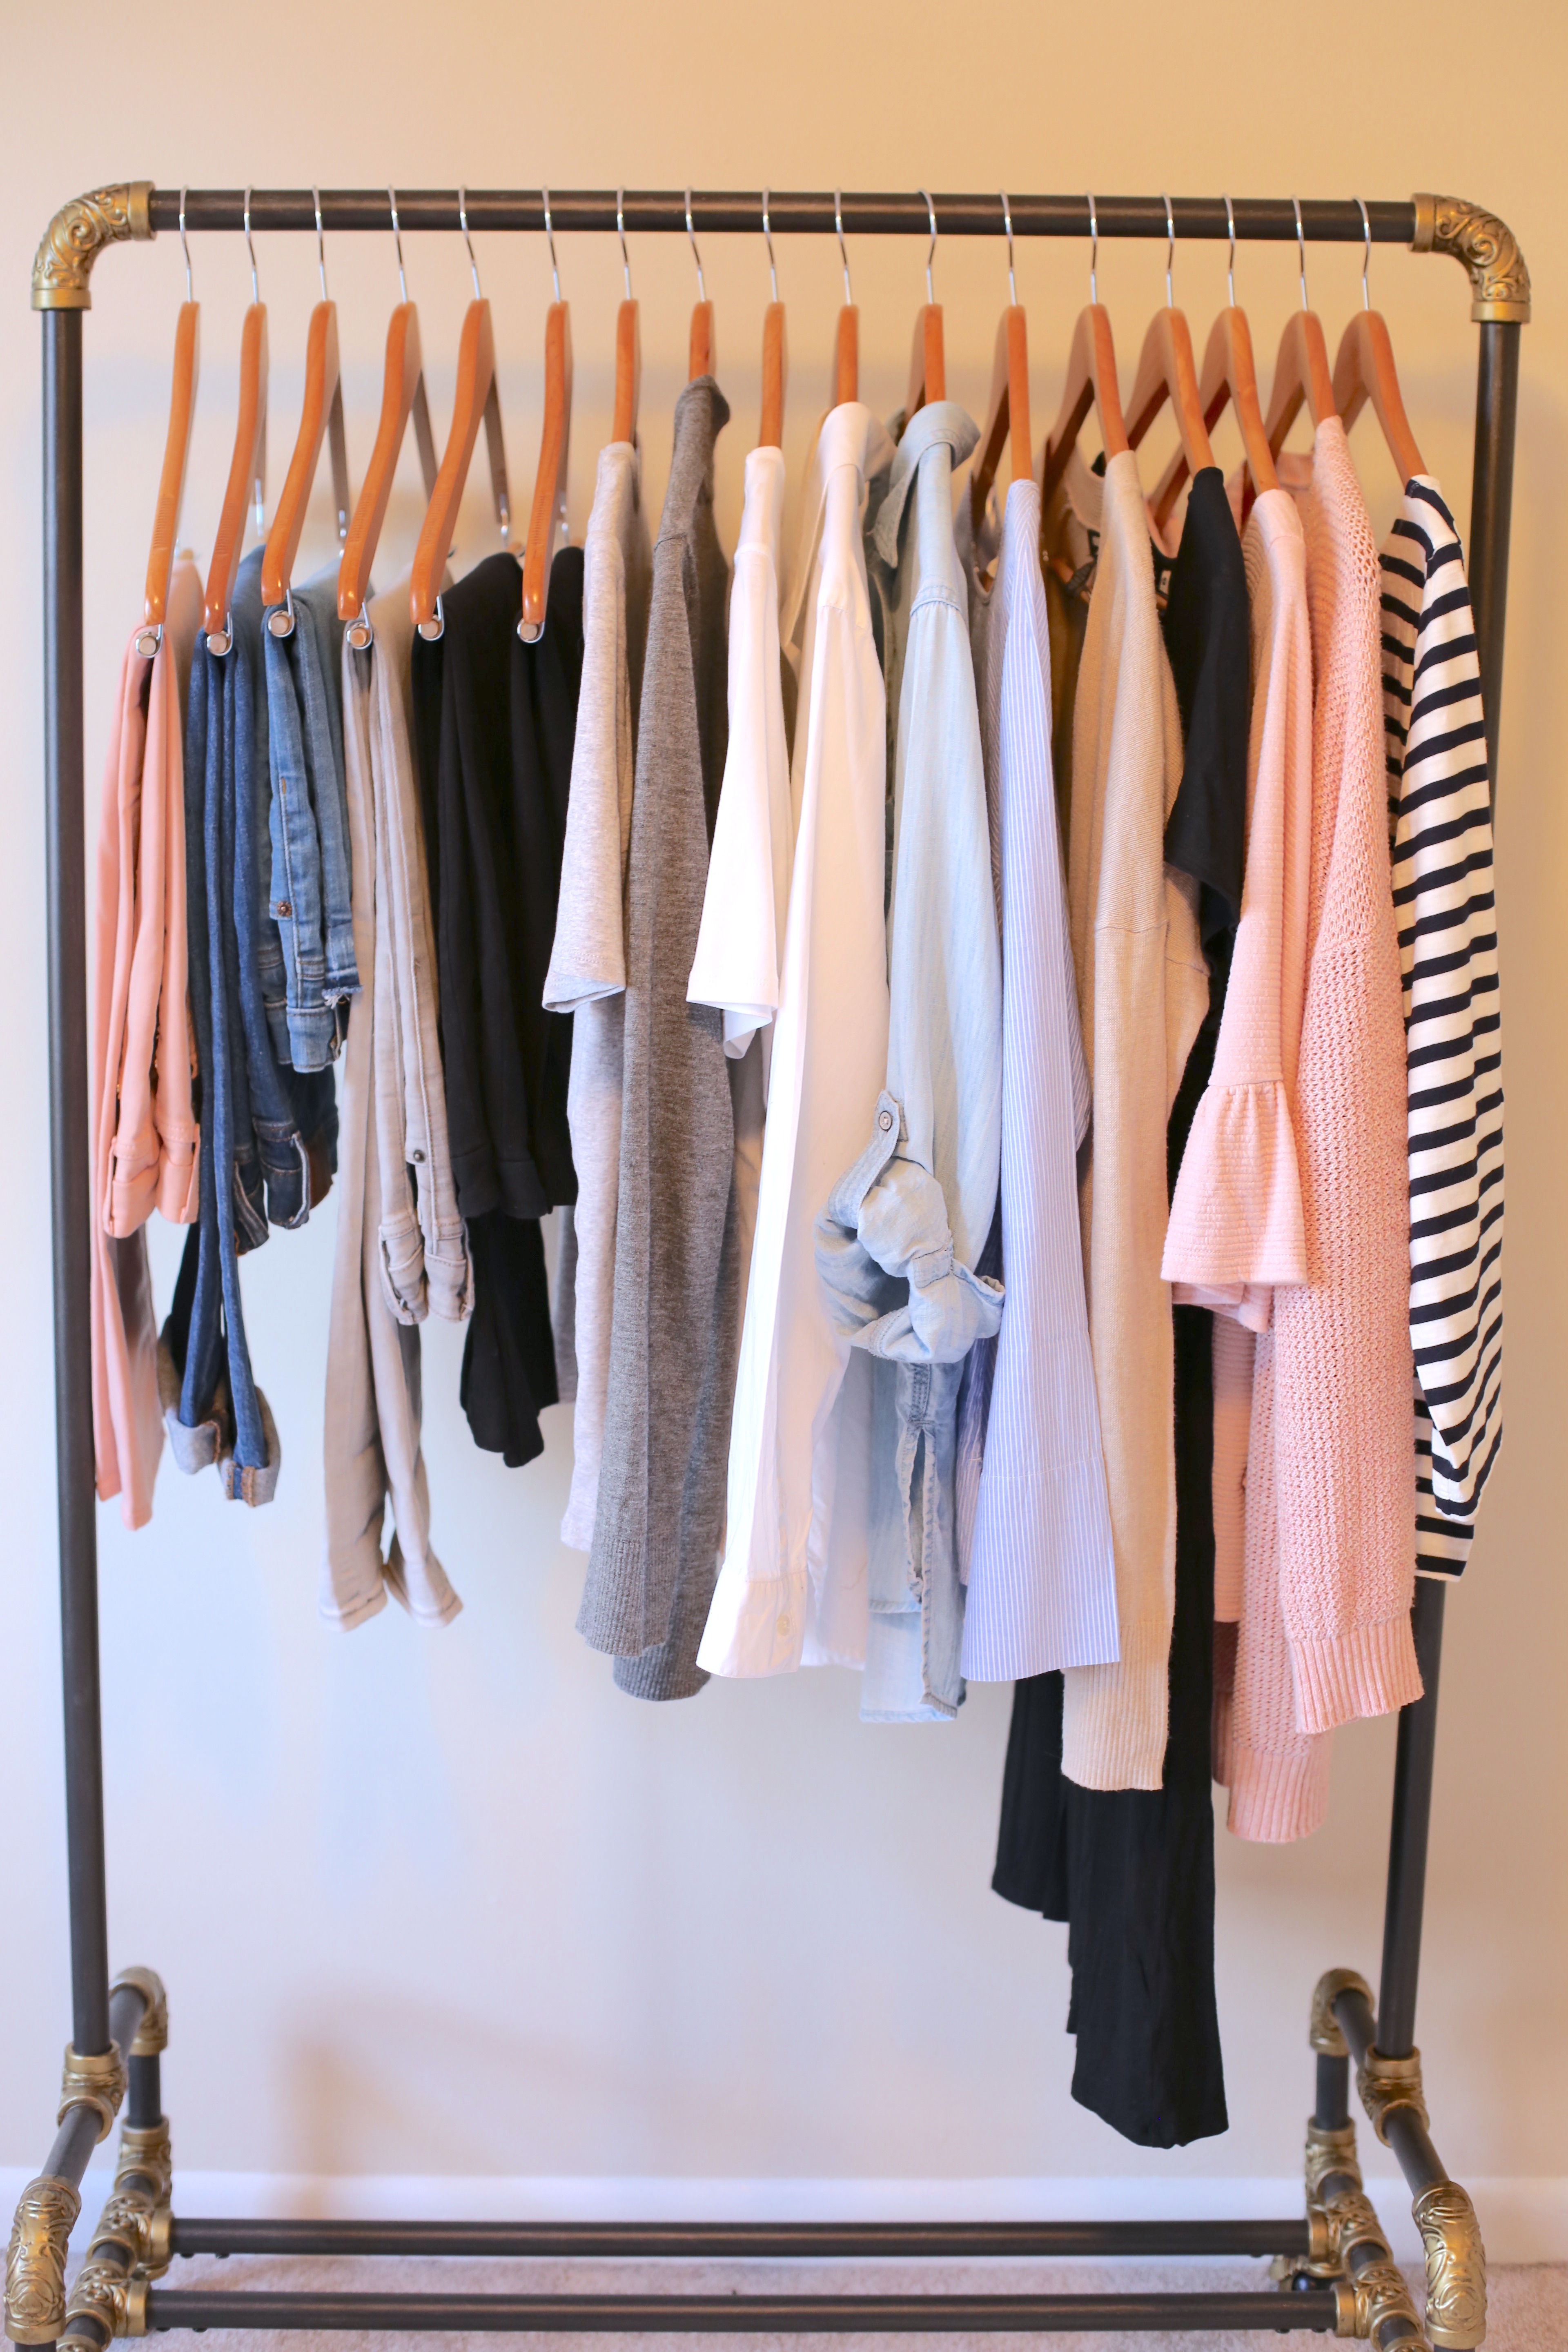 How-To-Start-a-Capsule-Wardrobe-popular-patterns